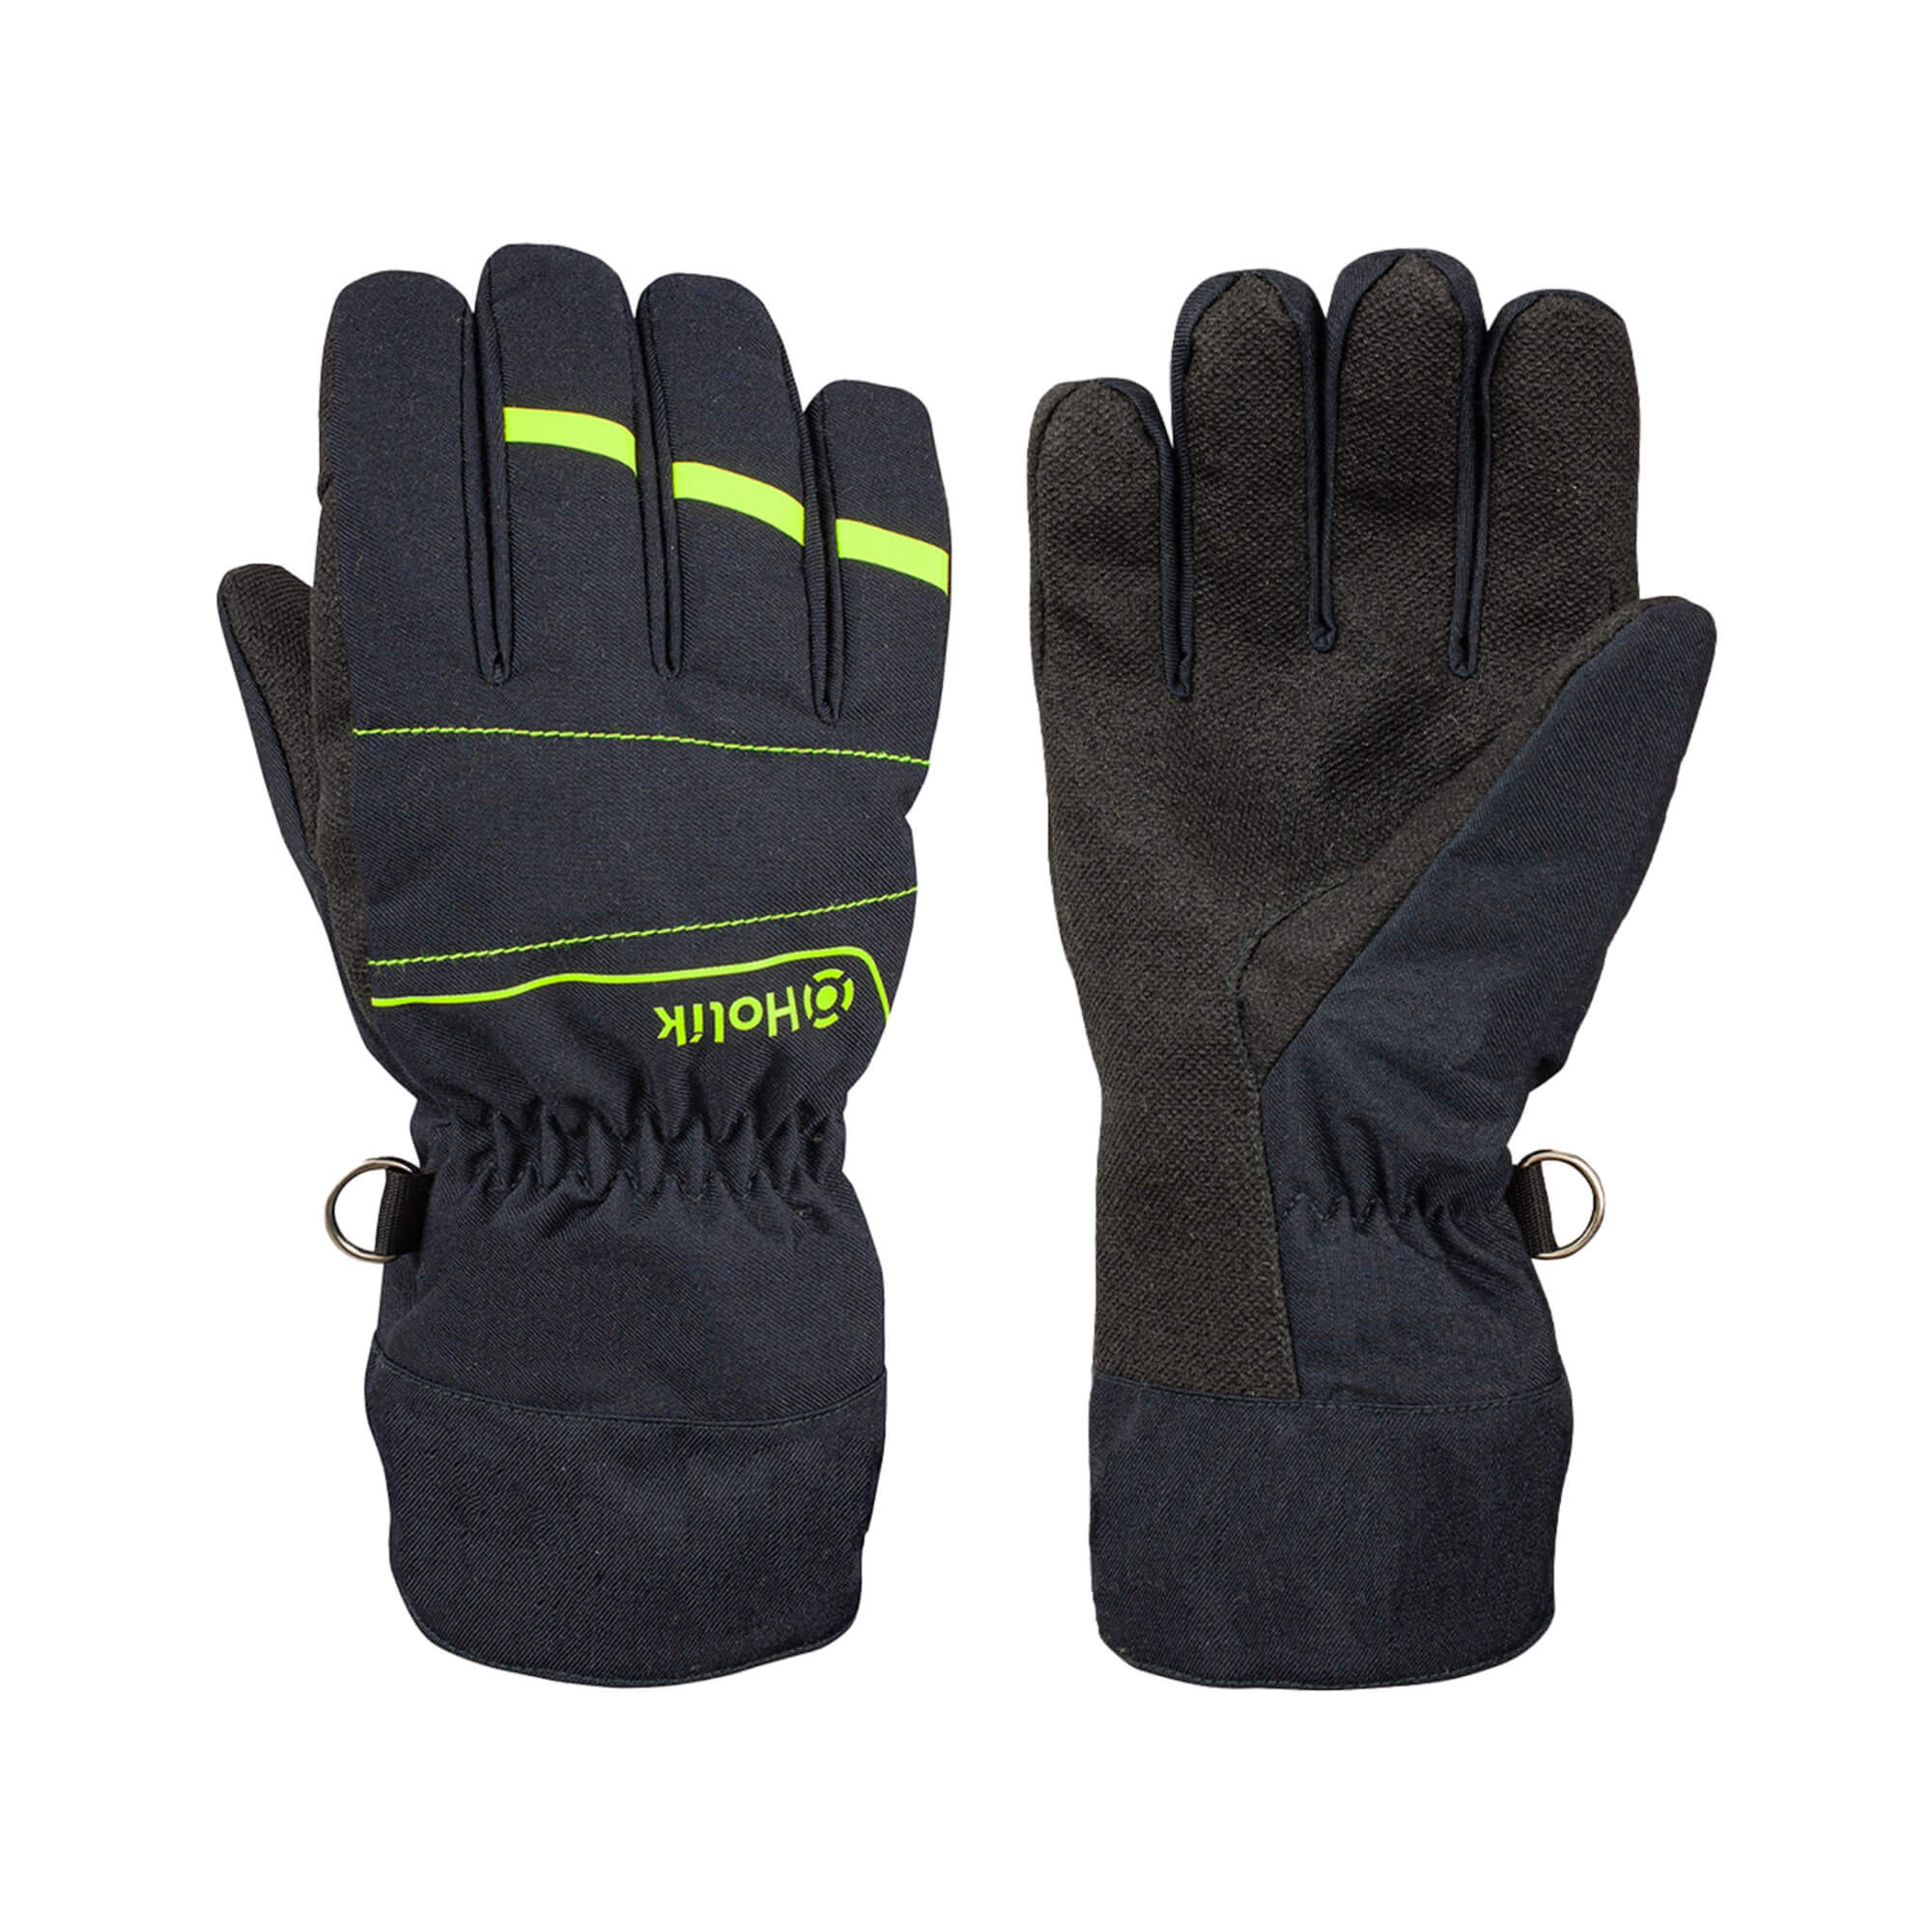 Protective gloves for firefighters Brela Easy